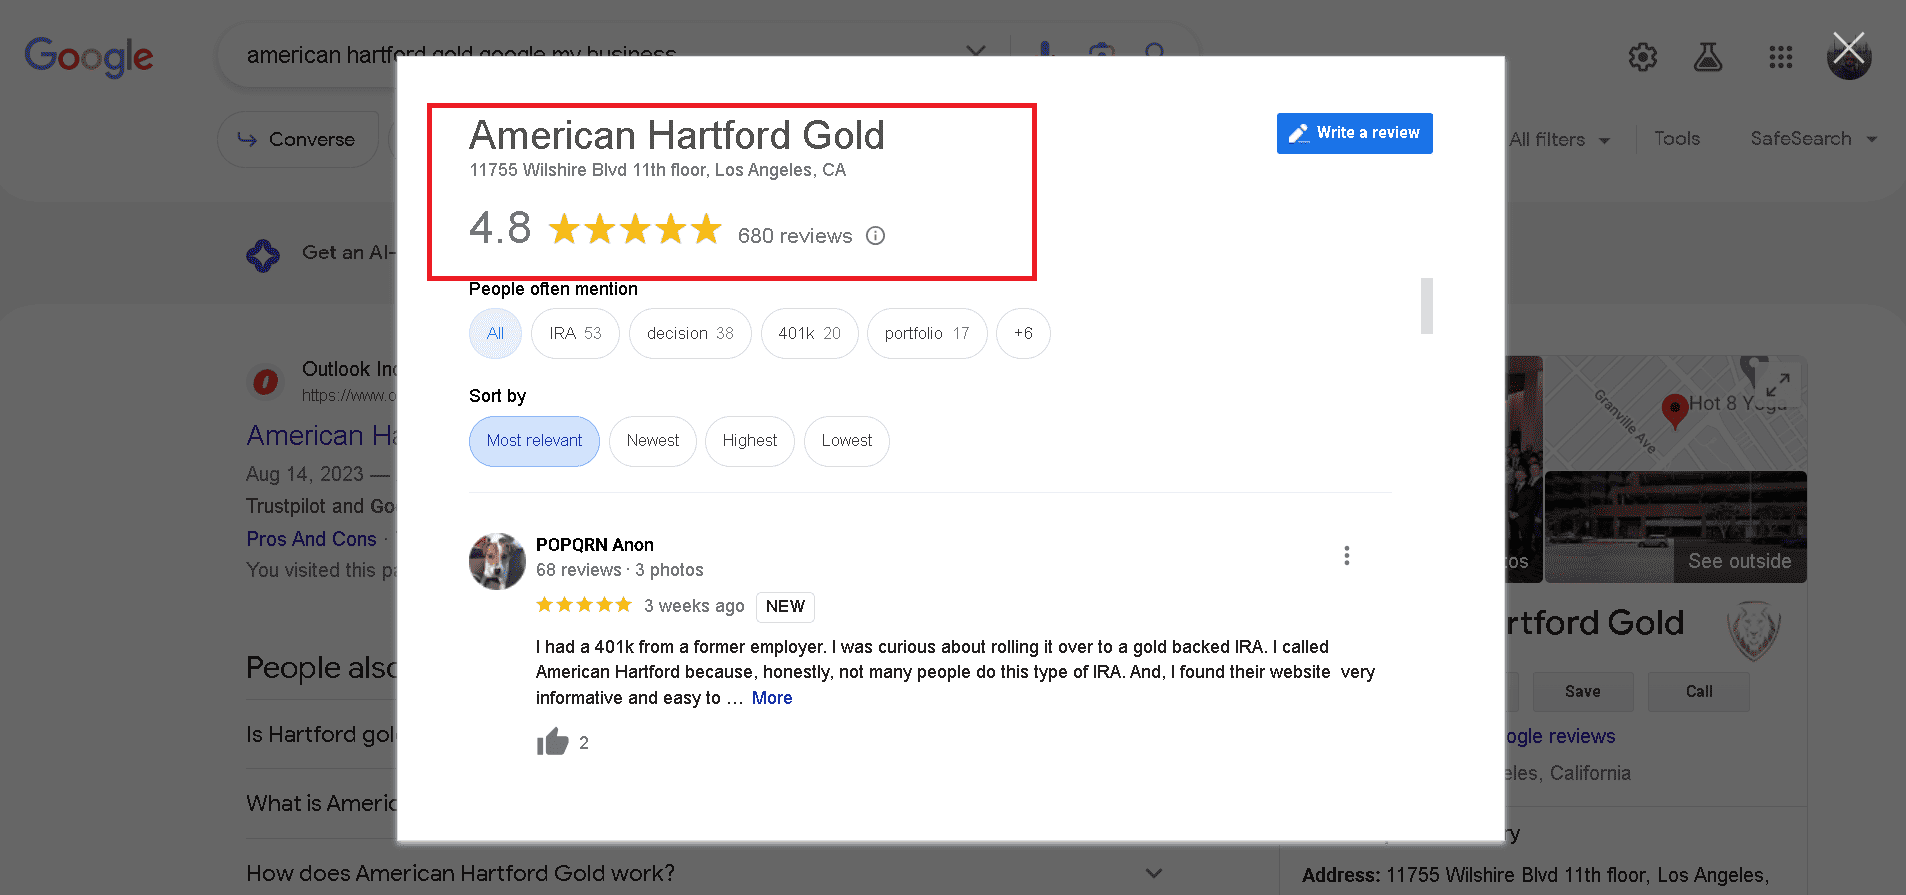 American Hartford Gold Google My Business profile and ratings